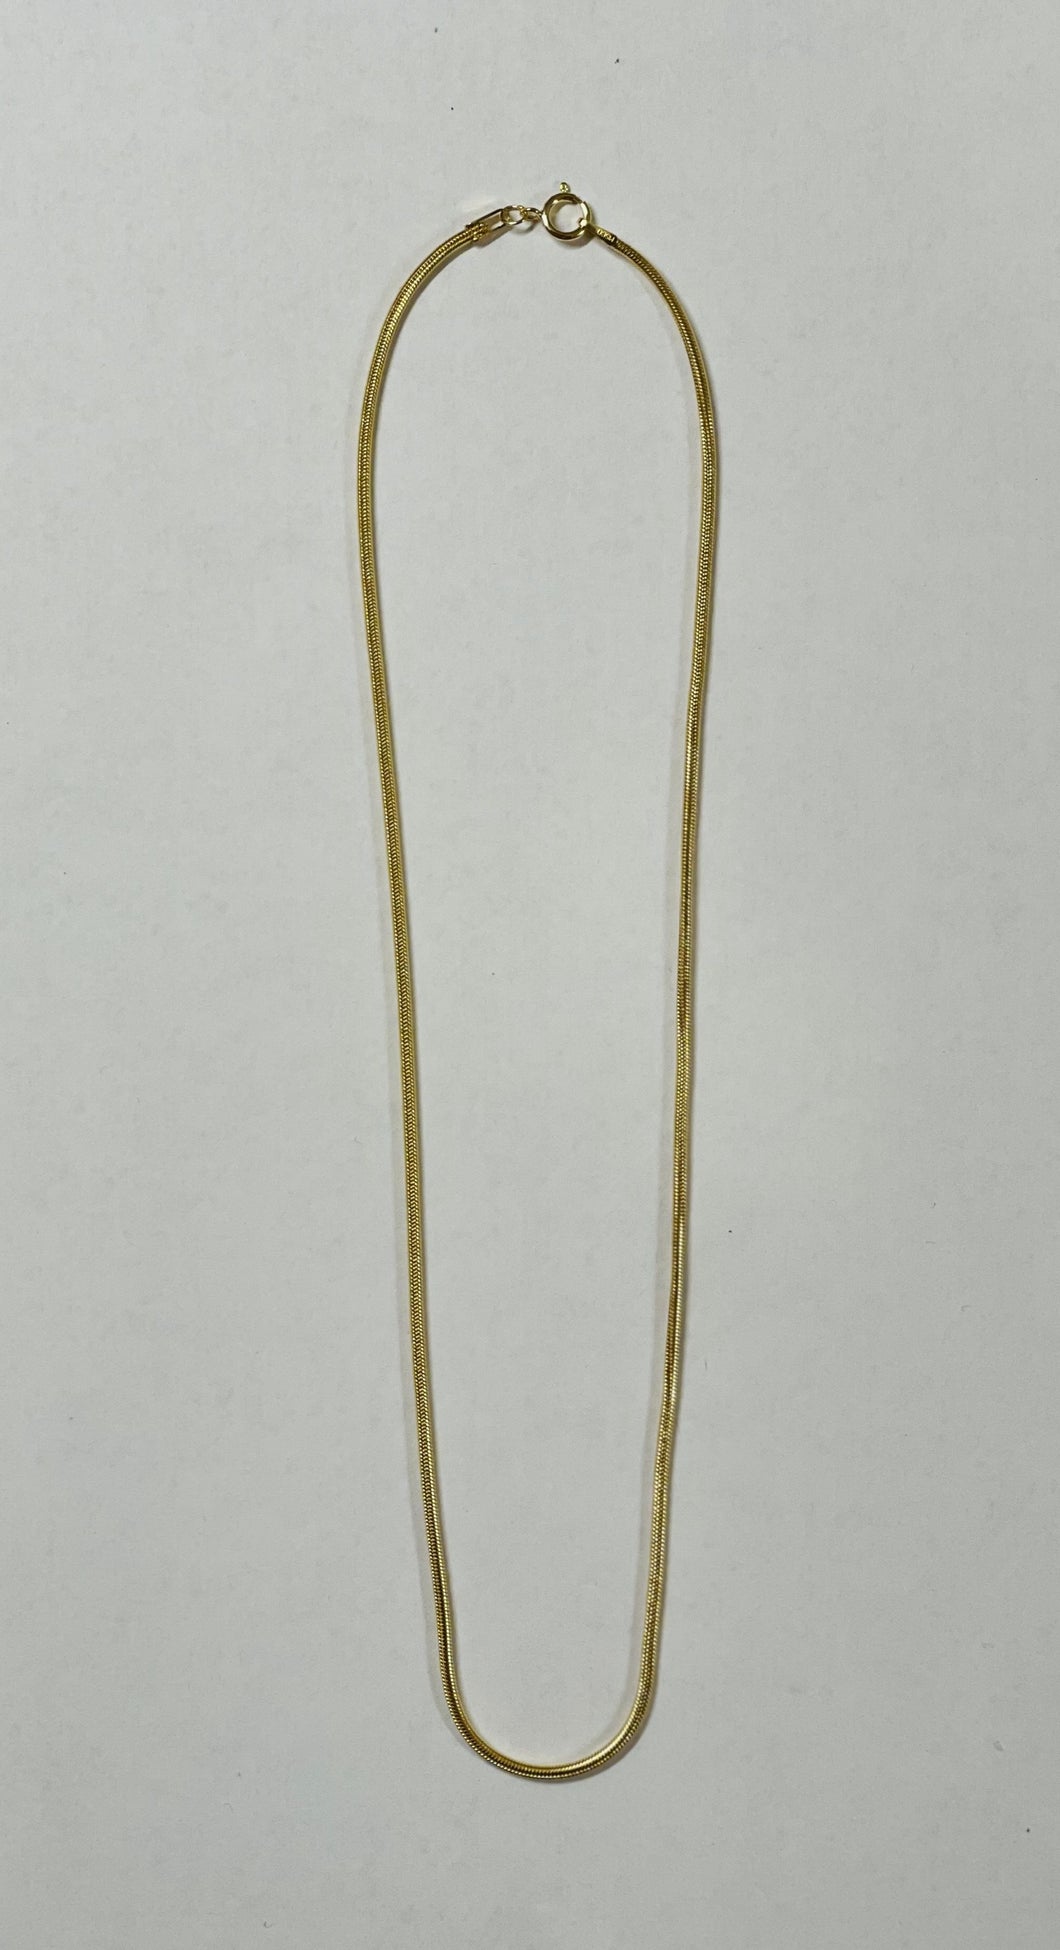 16” Gold Filled Seamed Snake Chain Necklace